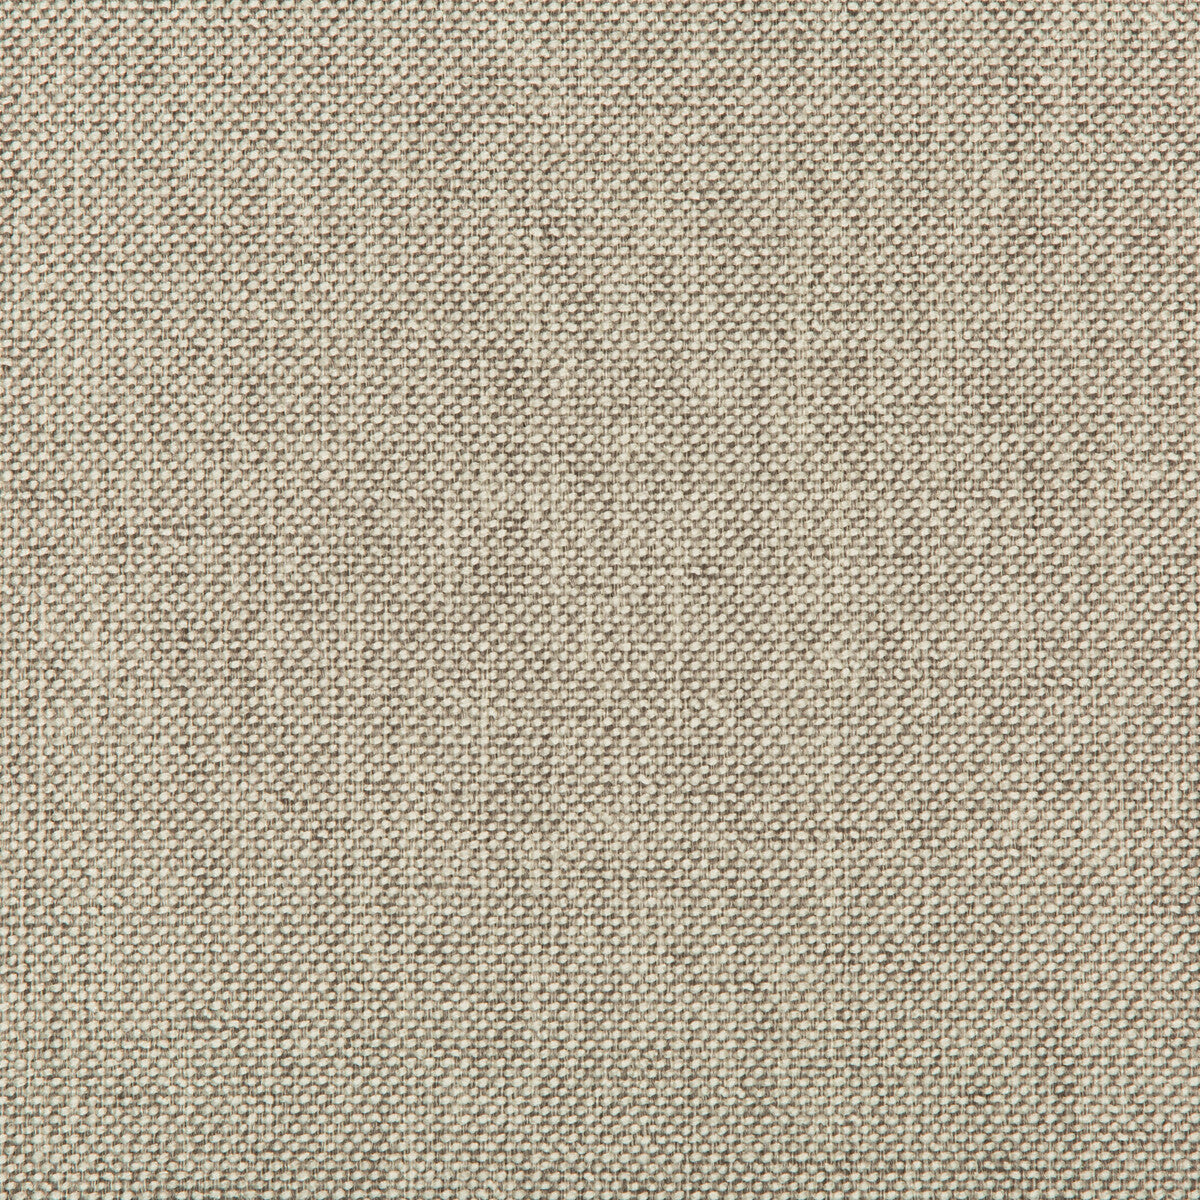 Williams fabric in pumice color - pattern 35744.1111.0 - by Kravet Contract in the Value Kravetarmor collection